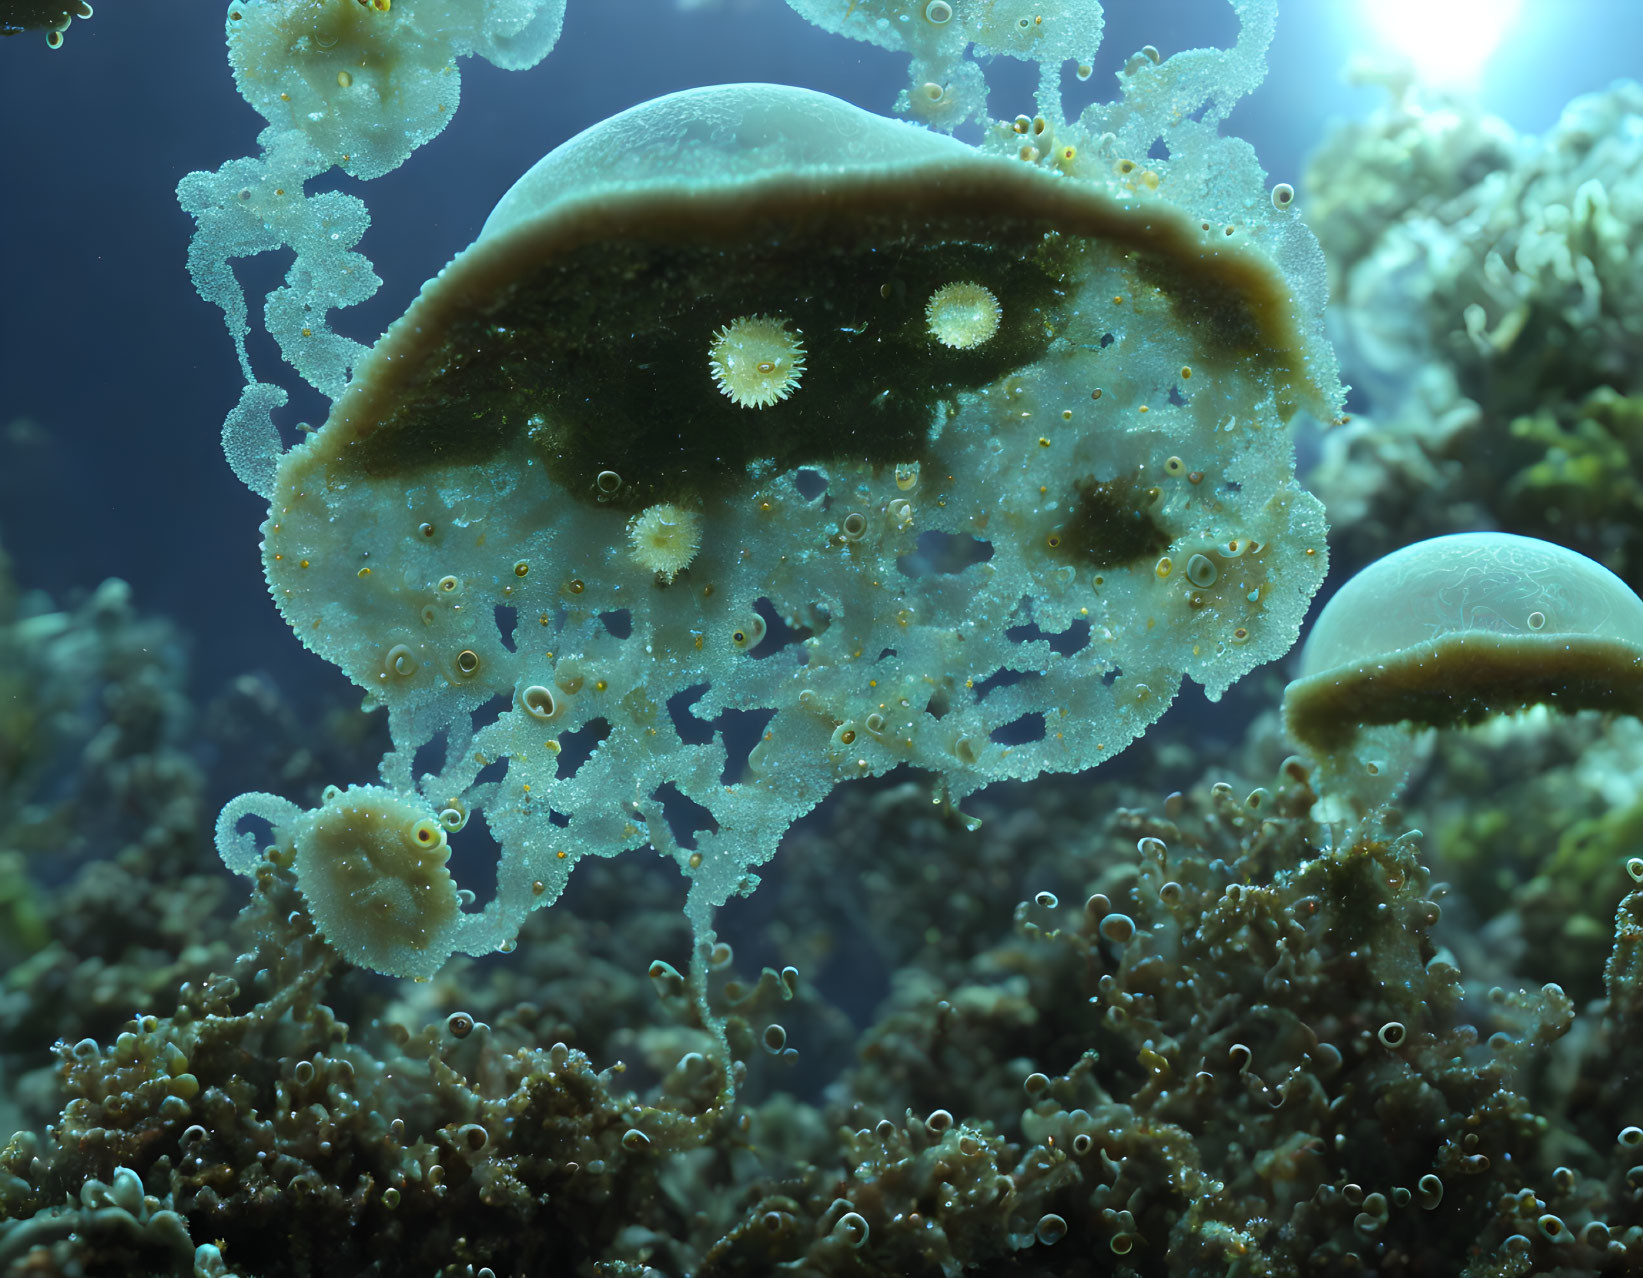 Translucent jellyfish and coral reef in blue underwater scene